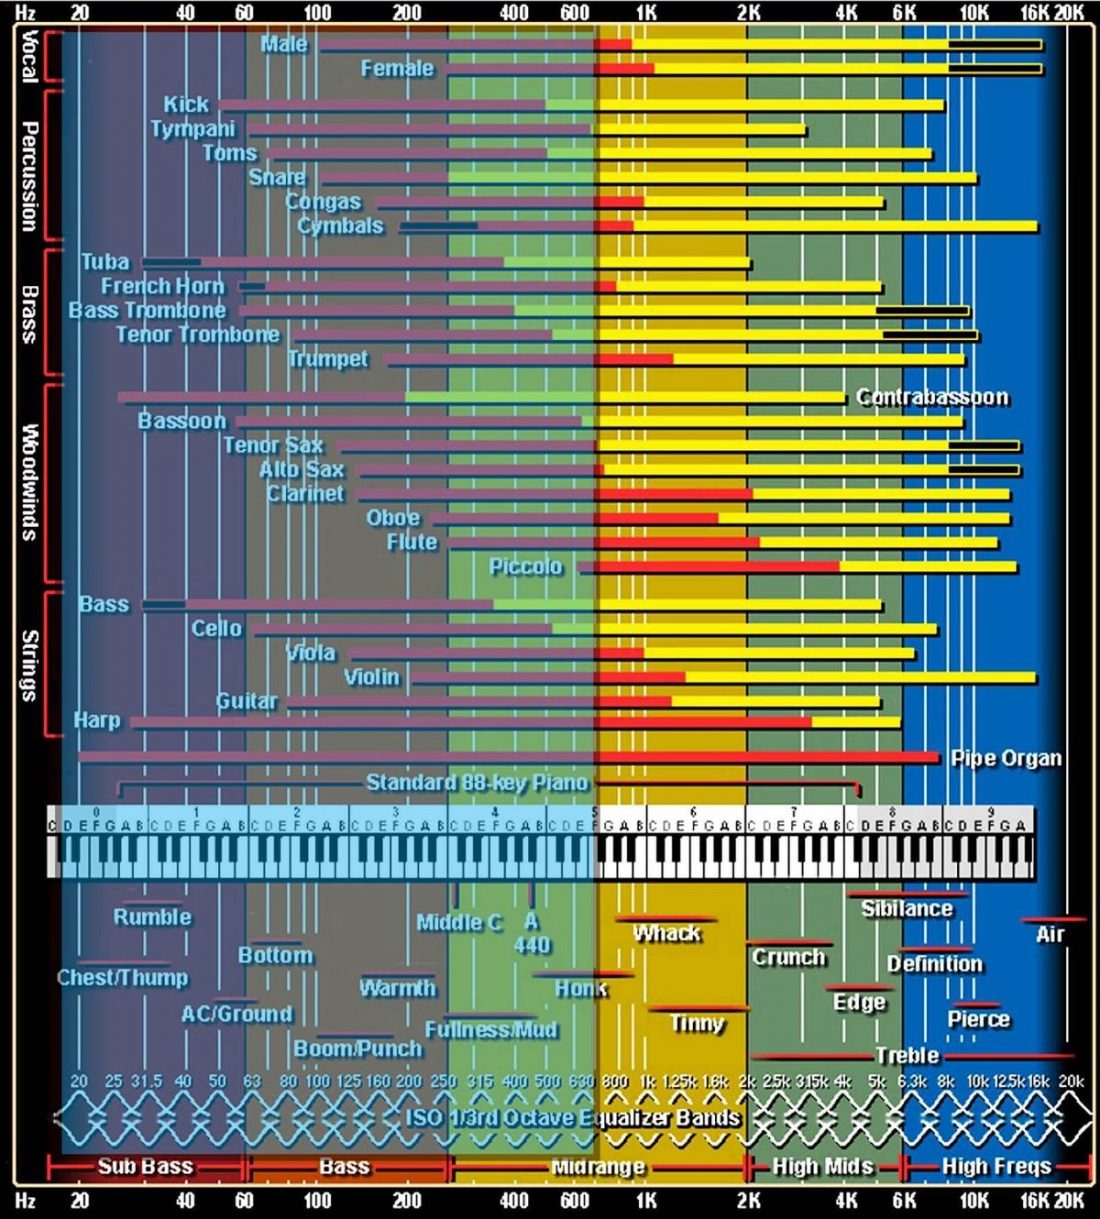 This diagram depicts the frequency ranges typically covered by various musical instruments. Below 700Hz, one can expect to find much of the fundamental tones produced by numerous instruments, including the bassoon, saxophone and human voice. Some harmonics (in yellow) are also covered. (From: independentrecording.net, modified by author)